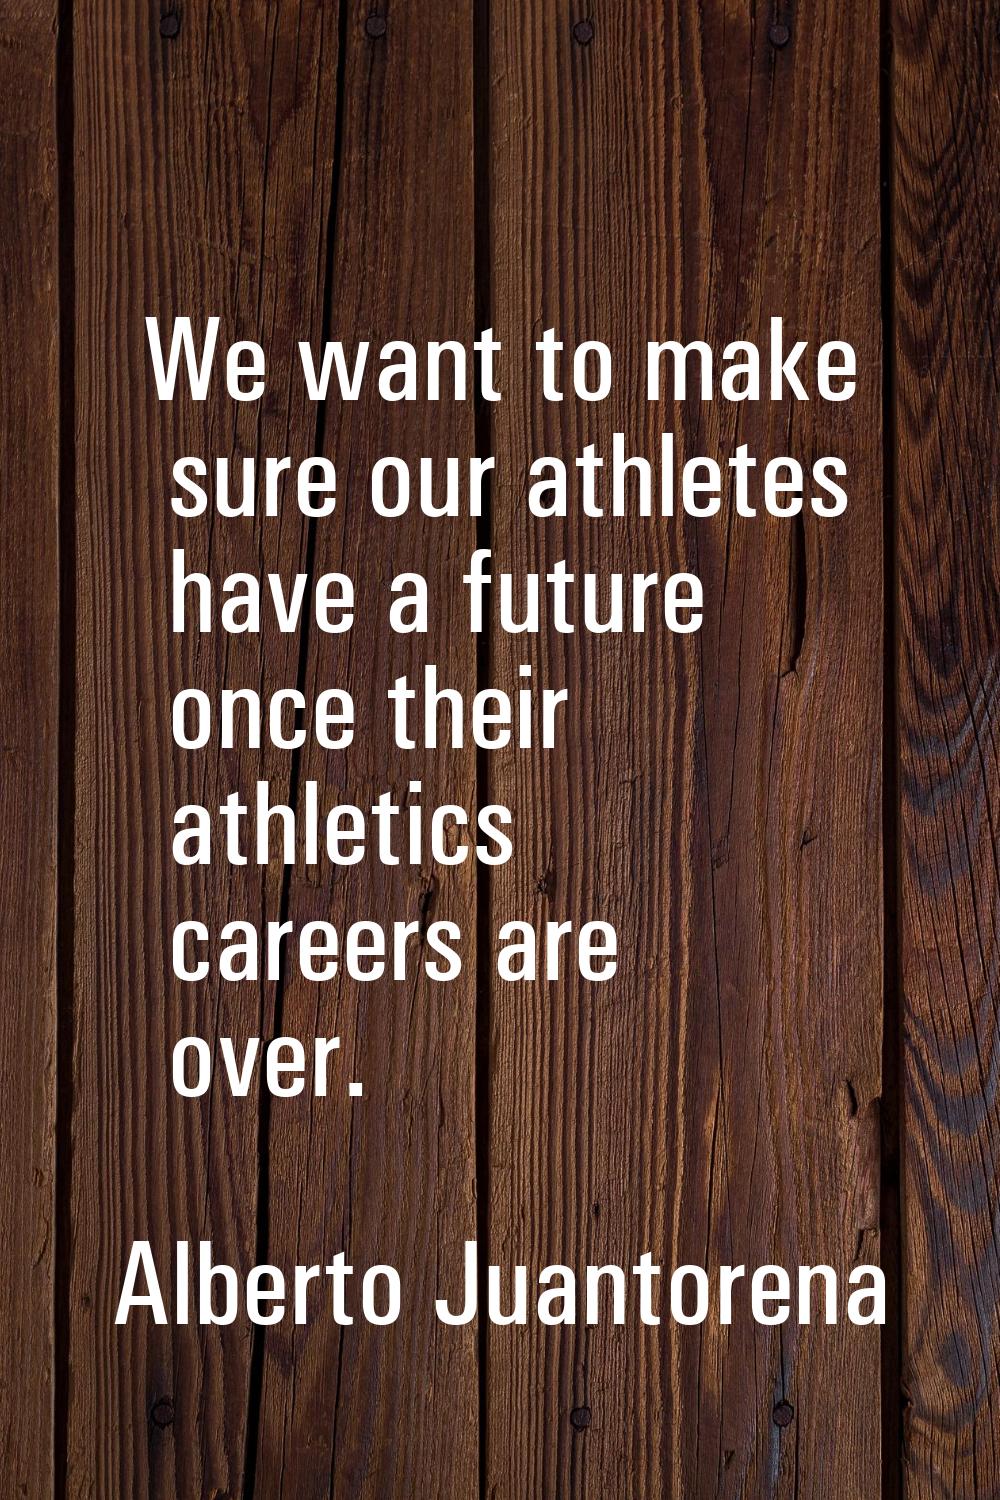 We want to make sure our athletes have a future once their athletics careers are over.